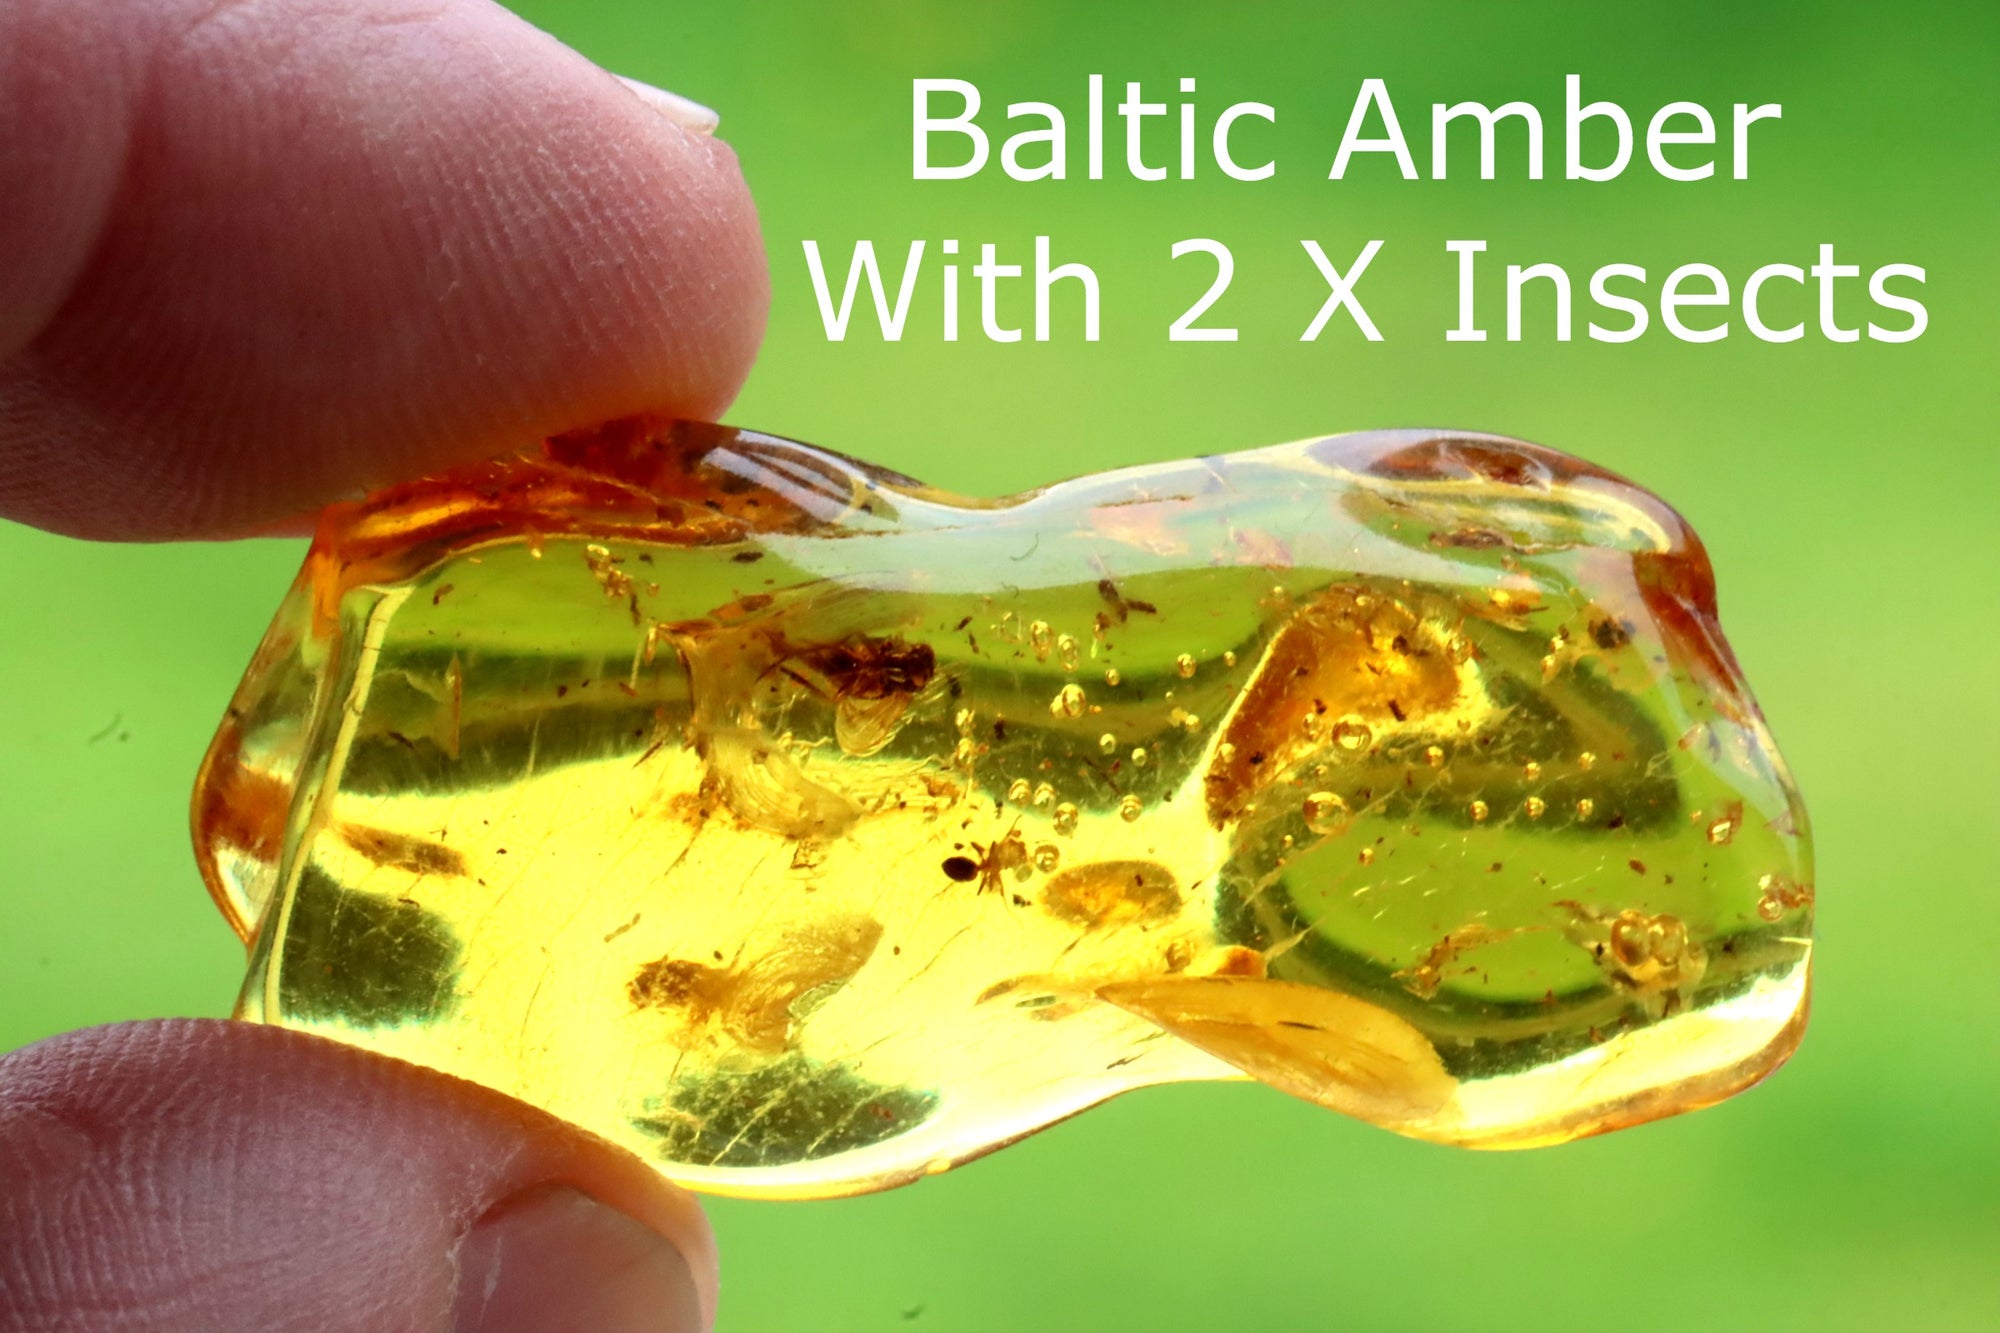 2 X 40 Million year old Insects and Air Bubbles Inclusion in Baltic Amber.